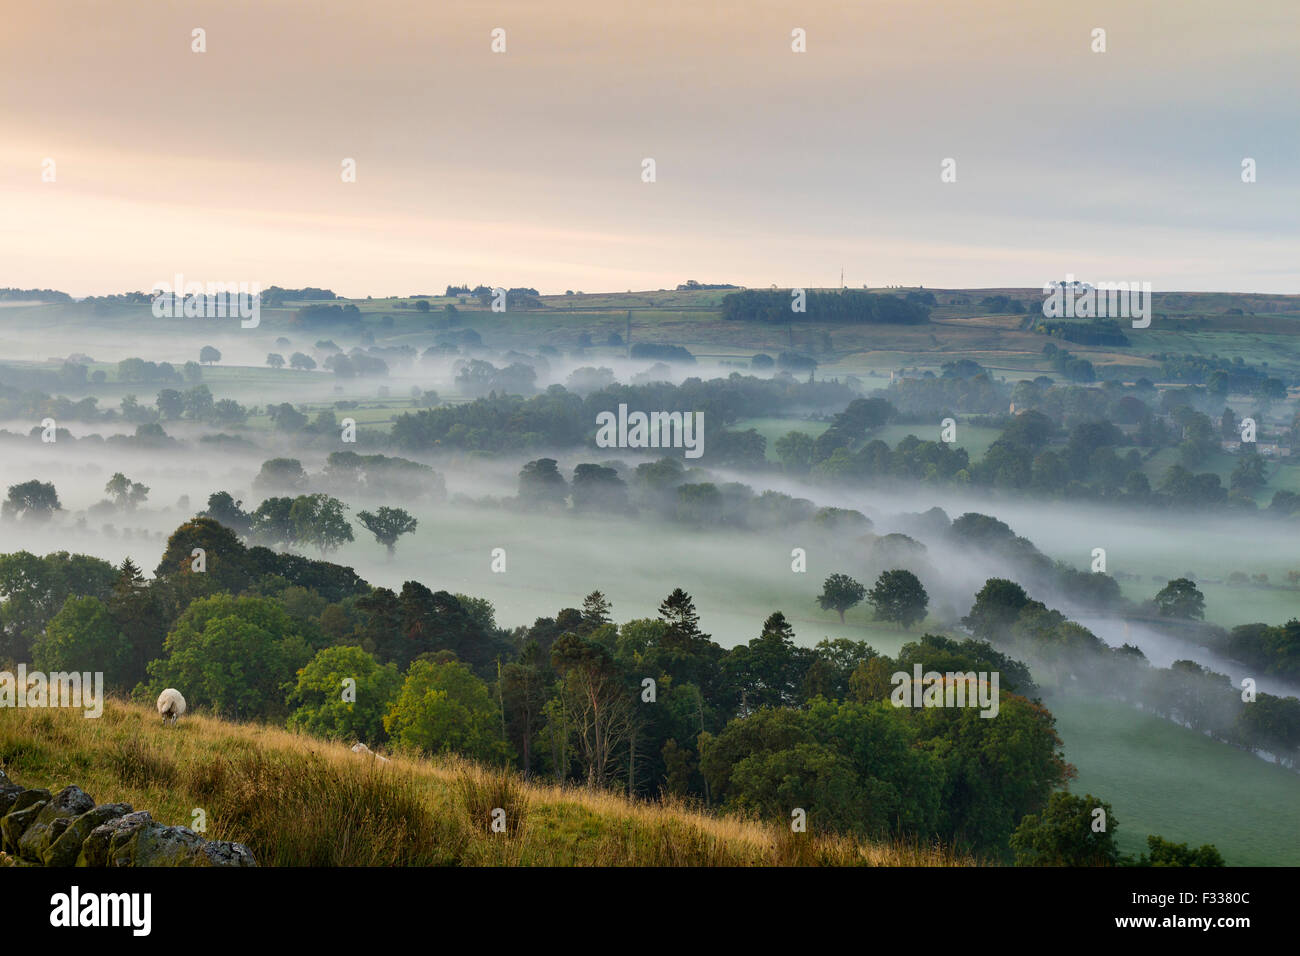 B6282 Road at Whistle Crag, Middleton-in-Teesdale, County Durham. Tuesday 29th September 2015, UK Weather. It was a chilly and misty start to the day for Northern England and with visibility falling to less than 100 metres in places the Met Office have issued a yellow weather warning for fog. Credit:  David Forster/Alamy Live News Stock Photo